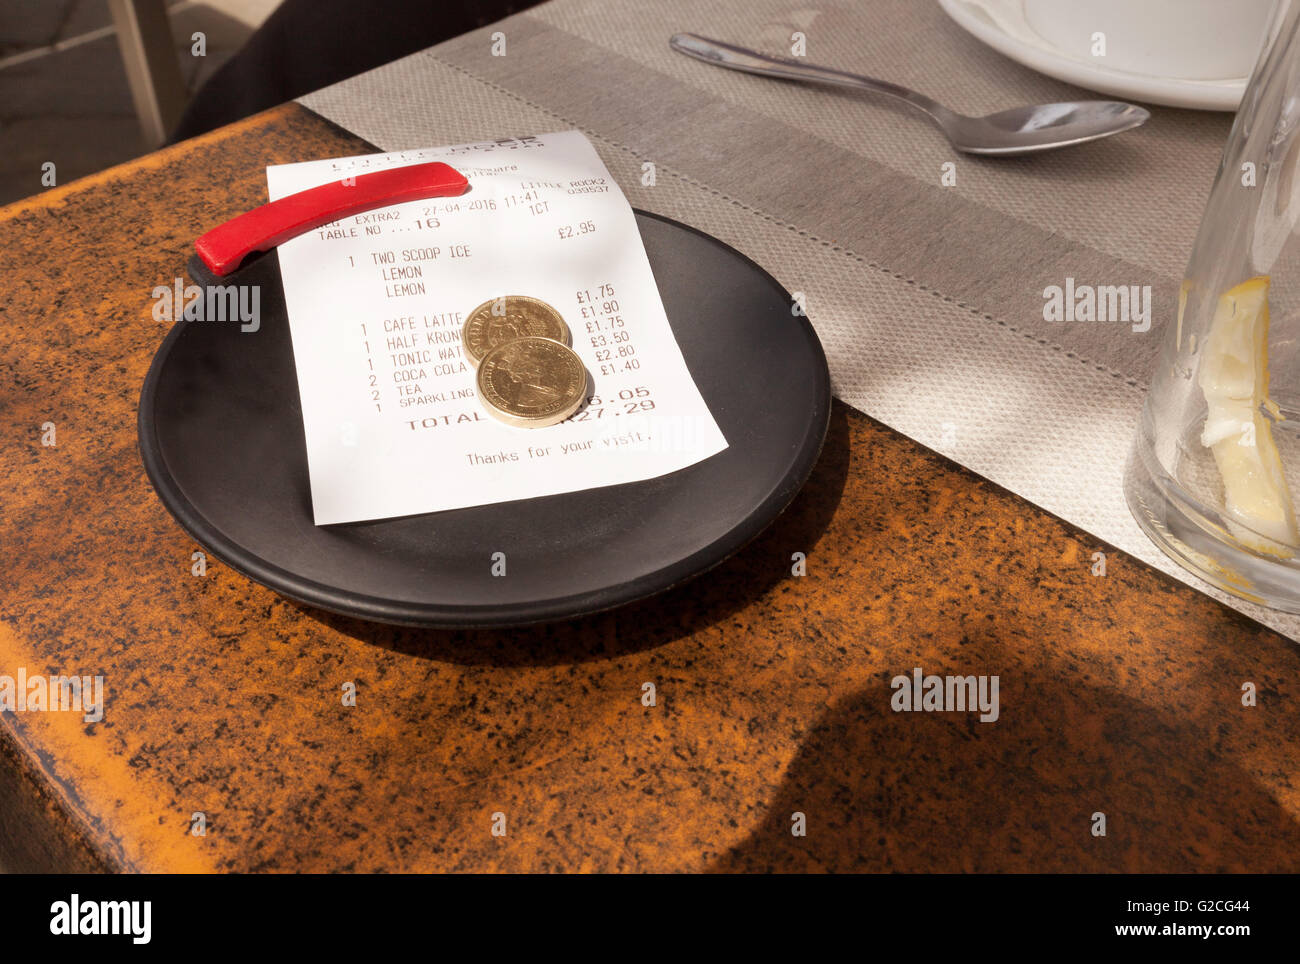 A tip left on the table with a bill Stock Photo